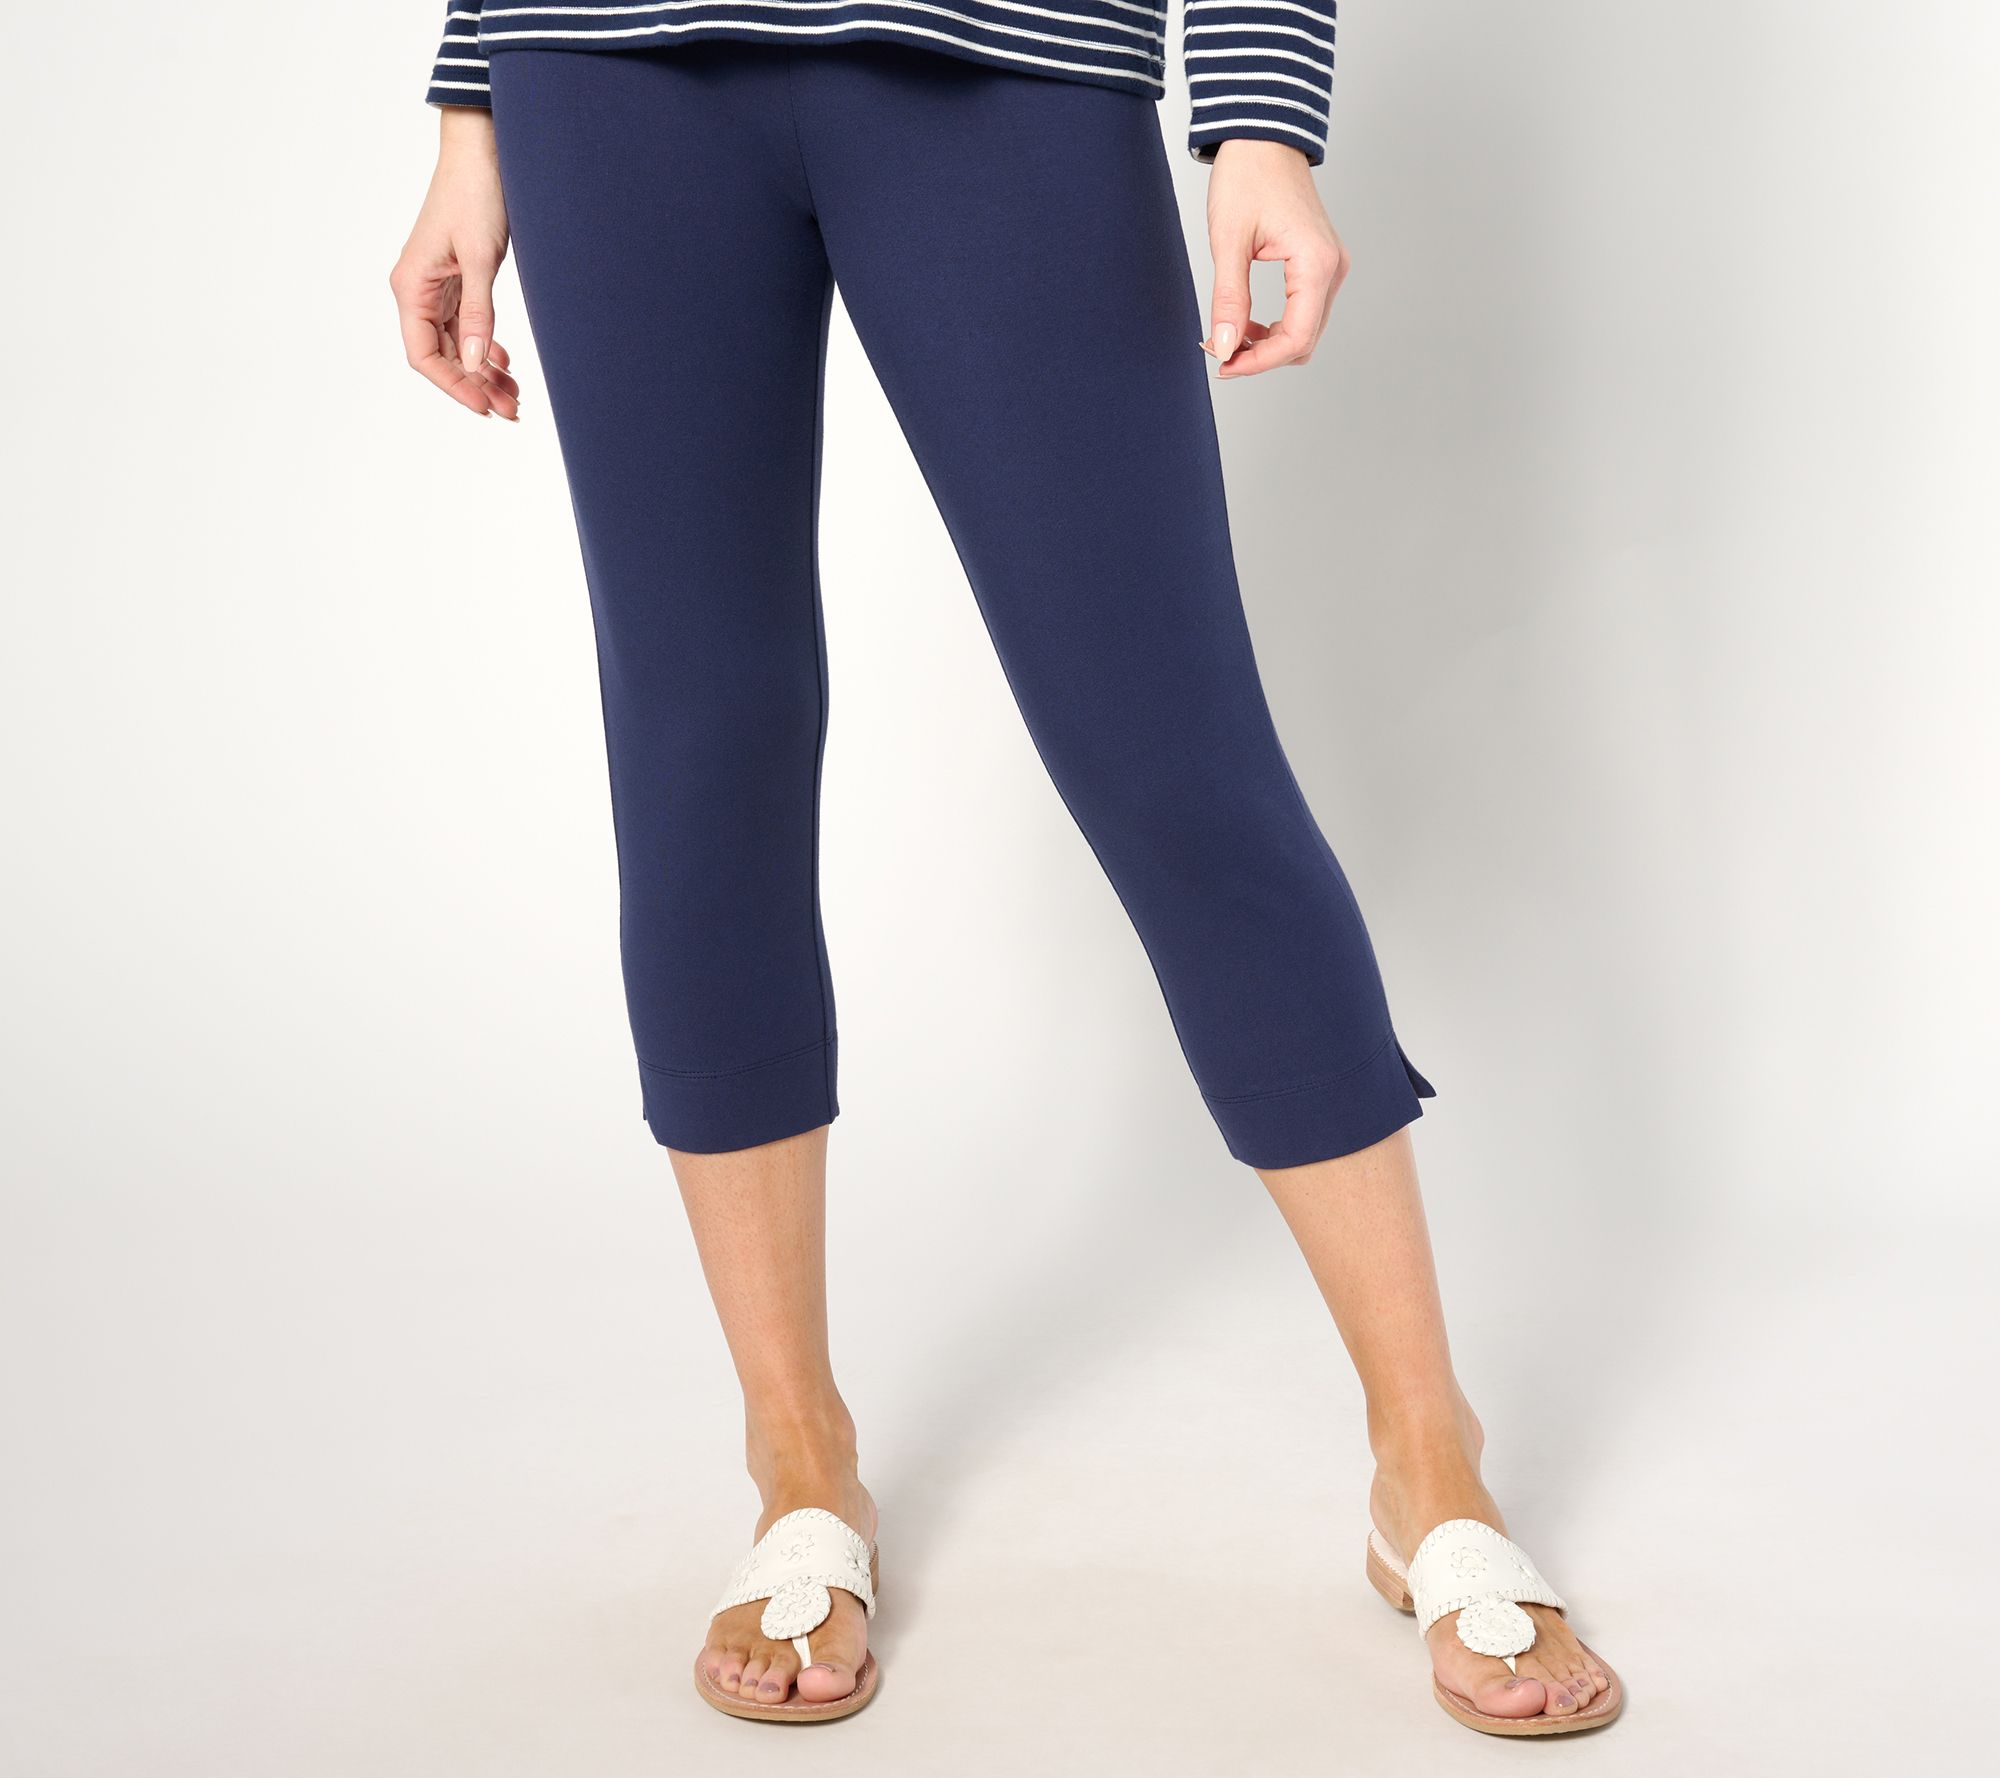 Women with Control - Tall Misses Small (6-8) - Capri Pants 